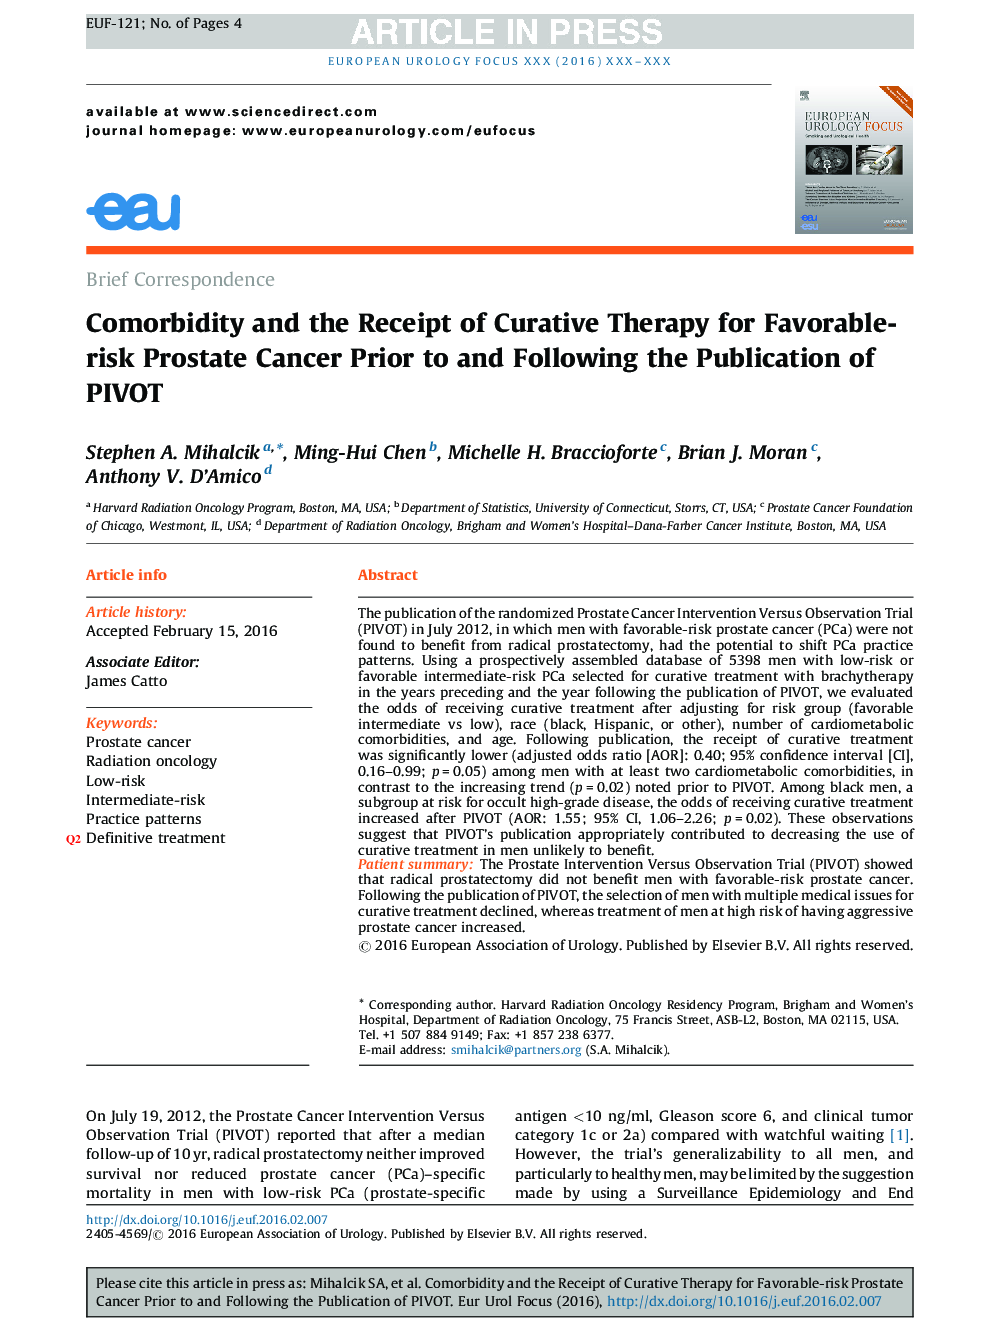 Comorbidity and the Receipt of Curative Therapy for Favorable-risk Prostate Cancer Prior to and Following the Publication of PIVOT